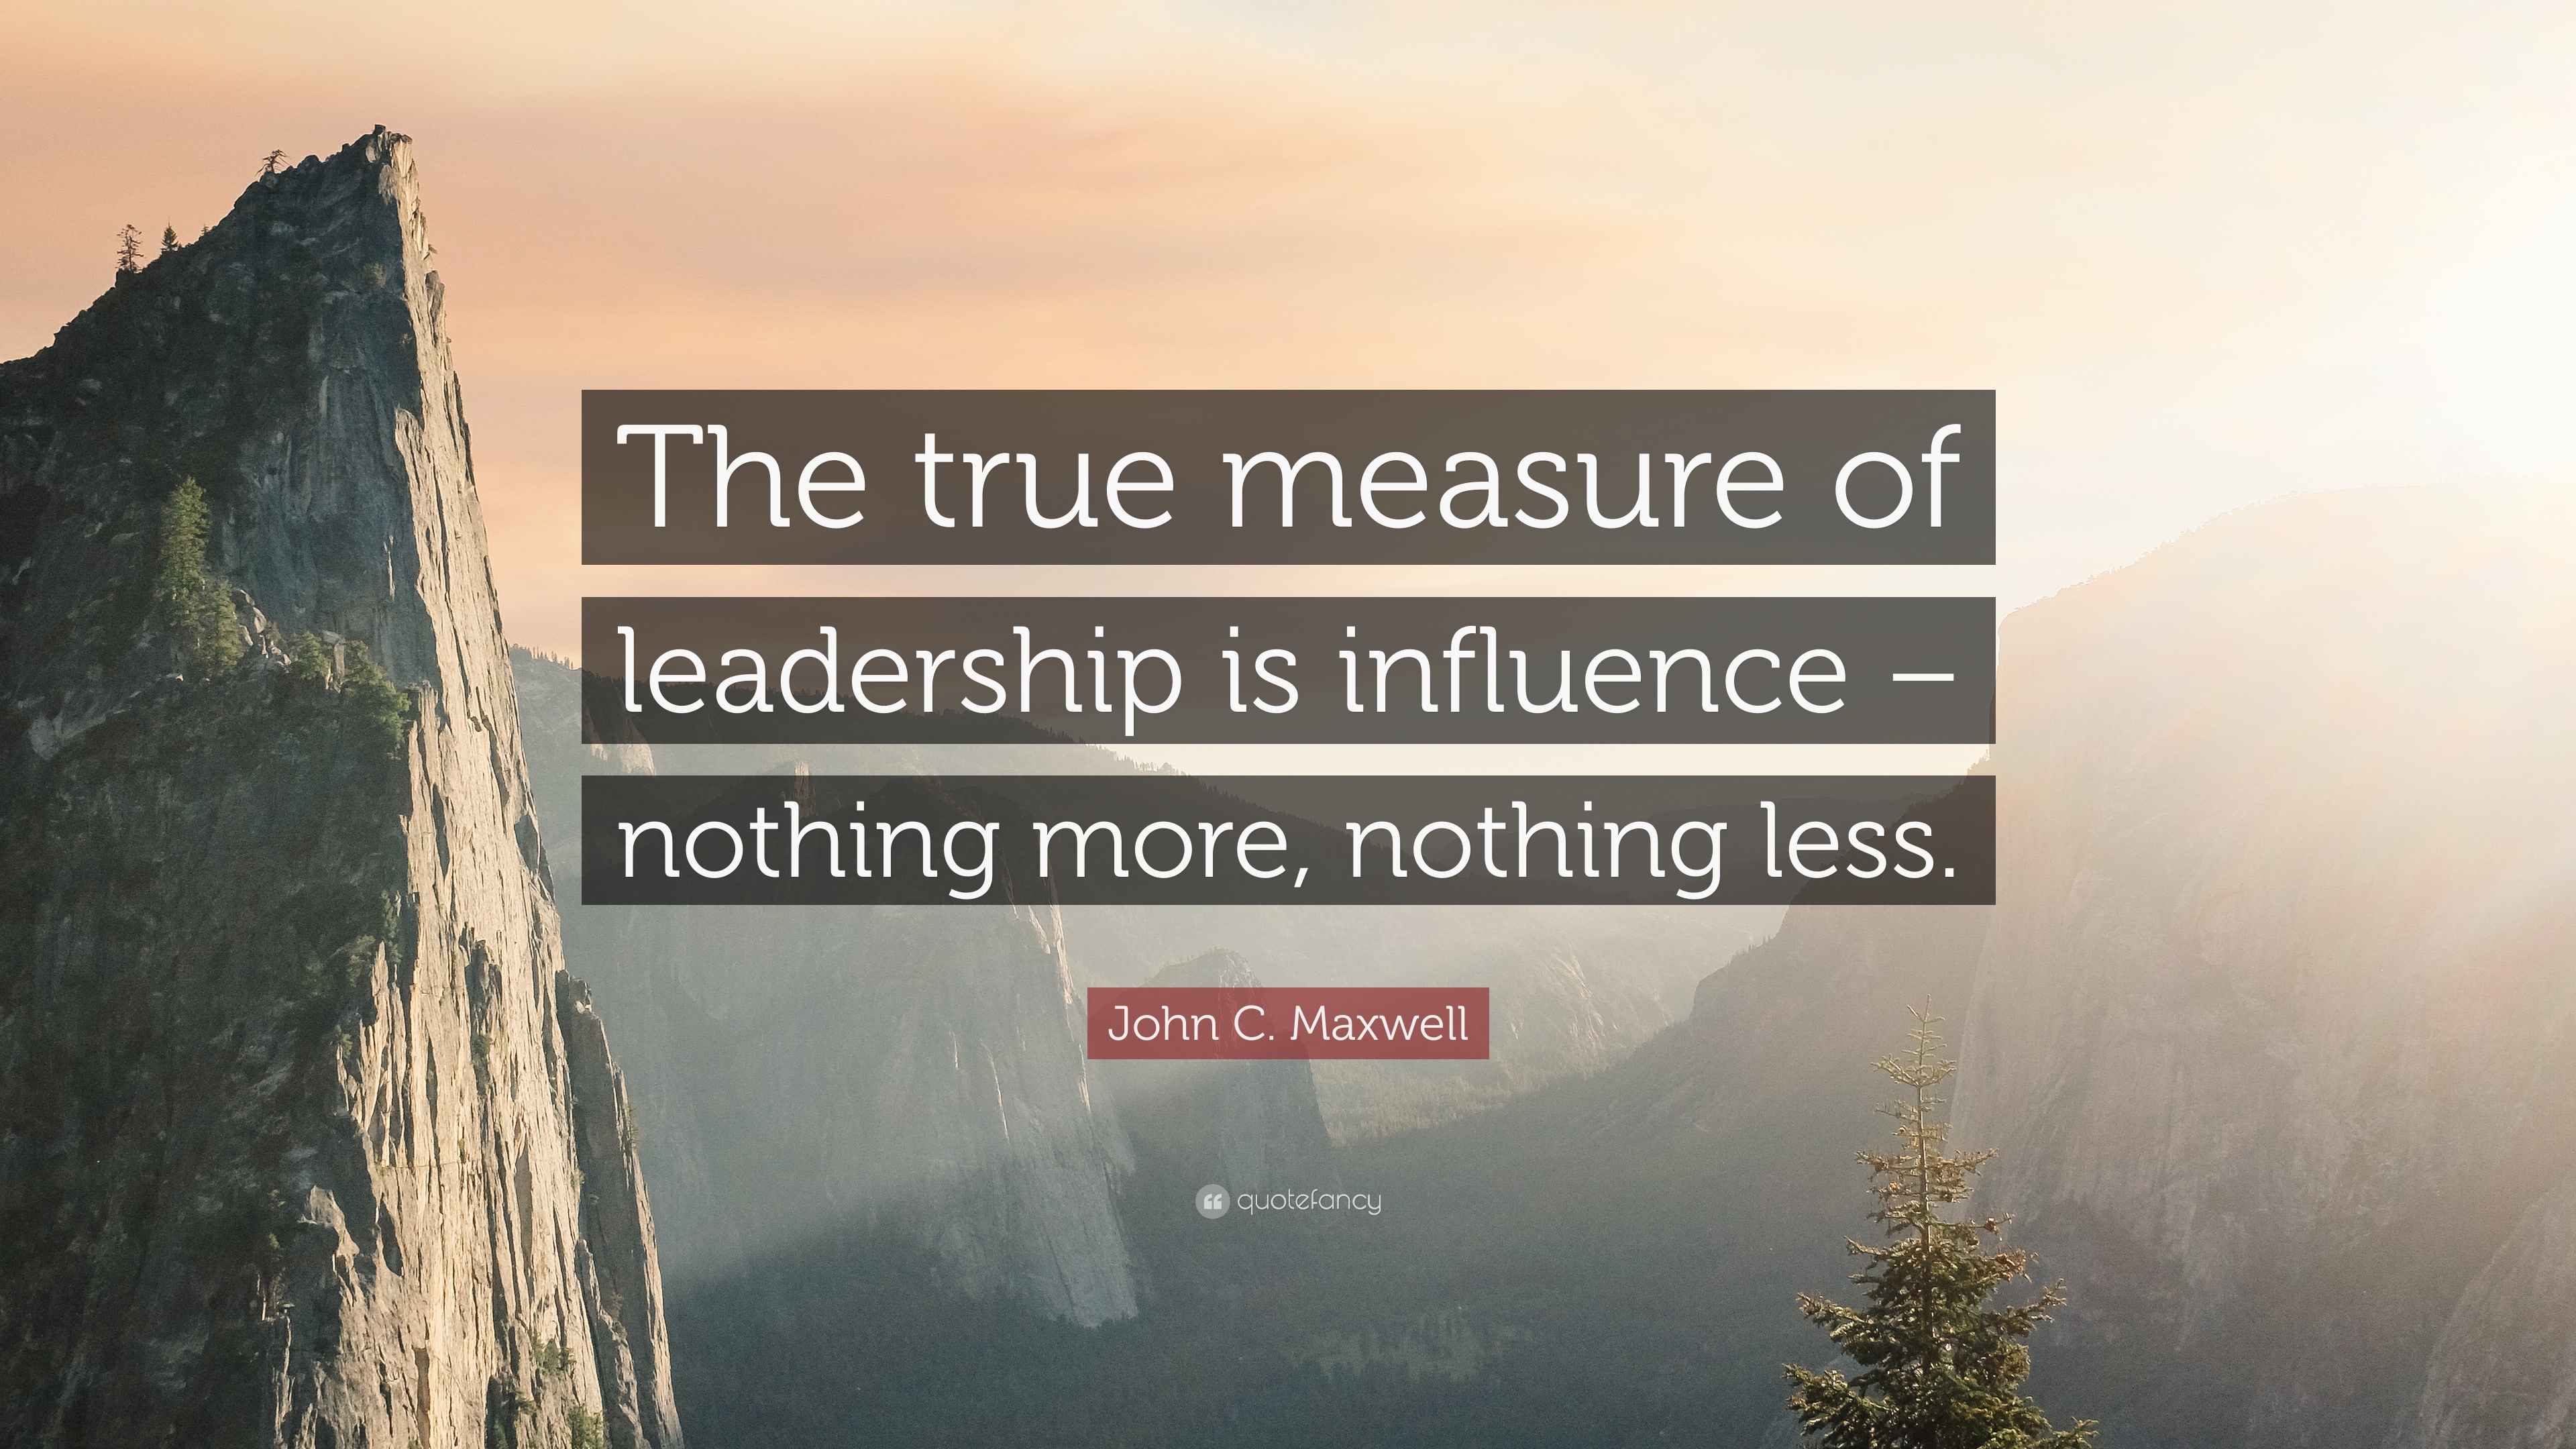 Here is the best definition of leadership